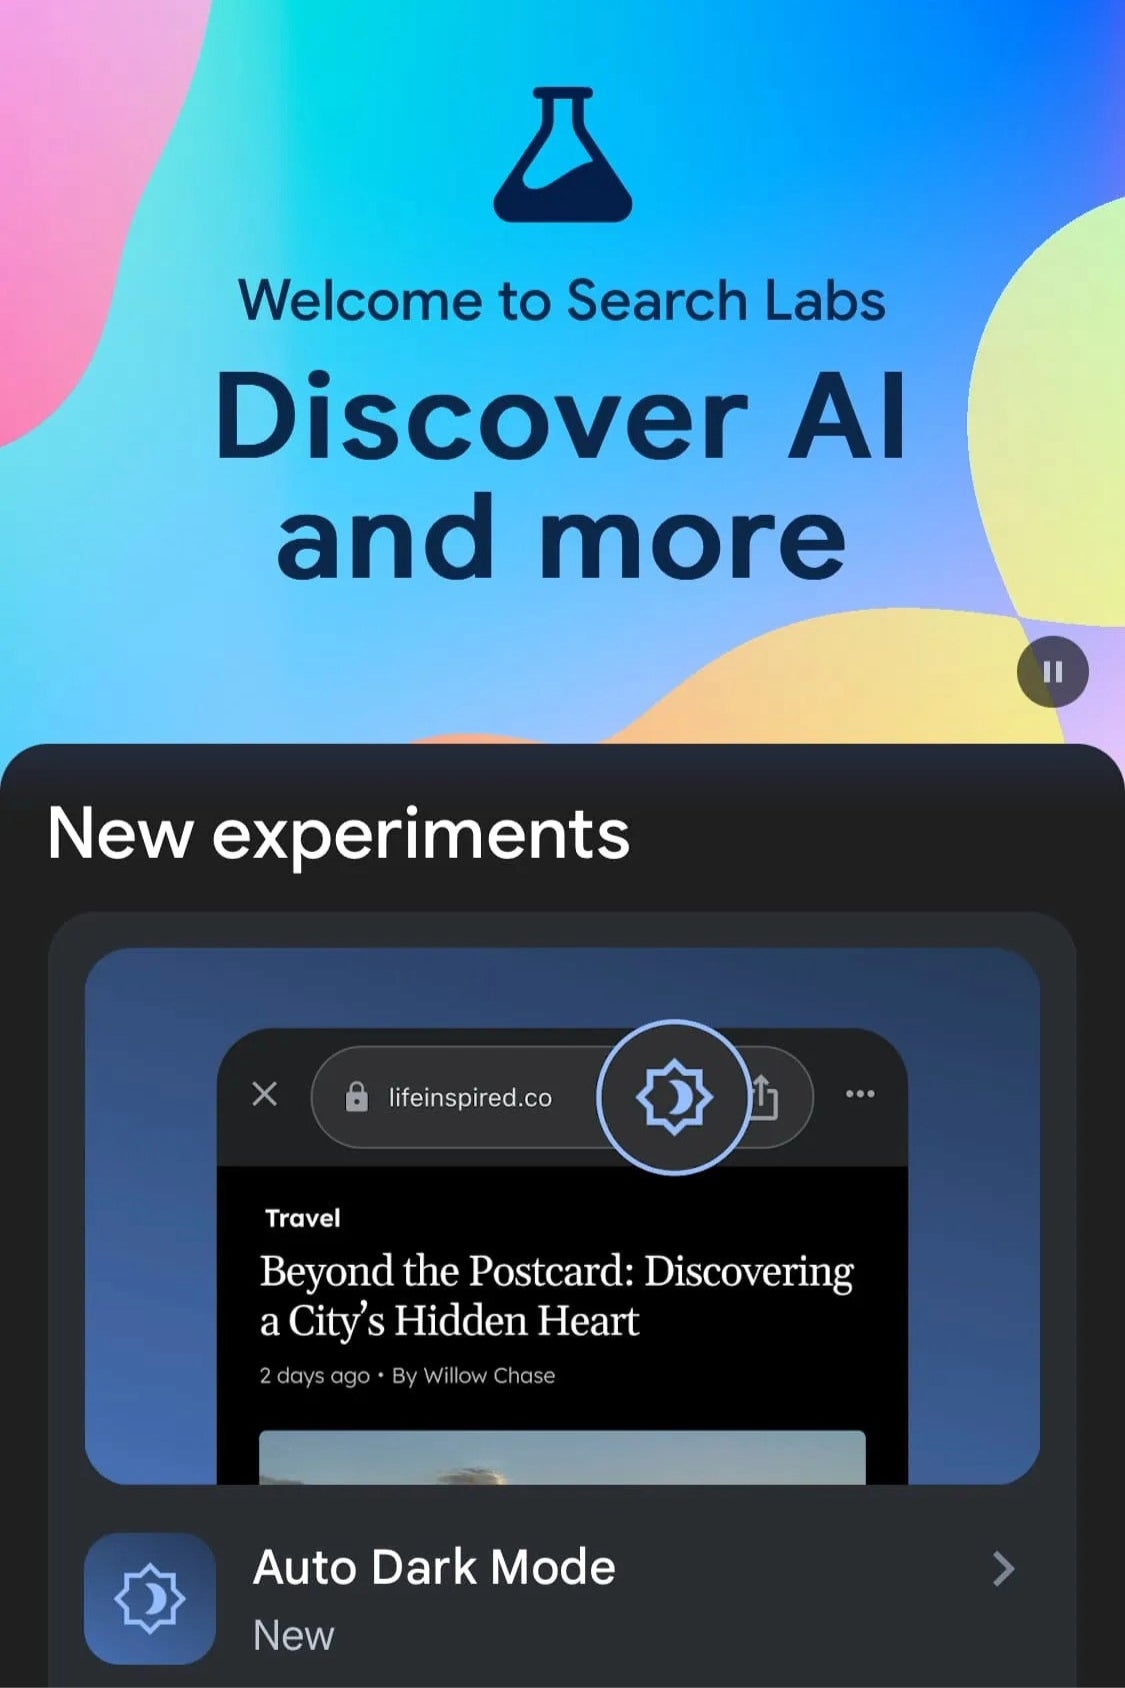 Image Credit–9to5Google - Google's testing a dark mode feature for websites in its iPhone app